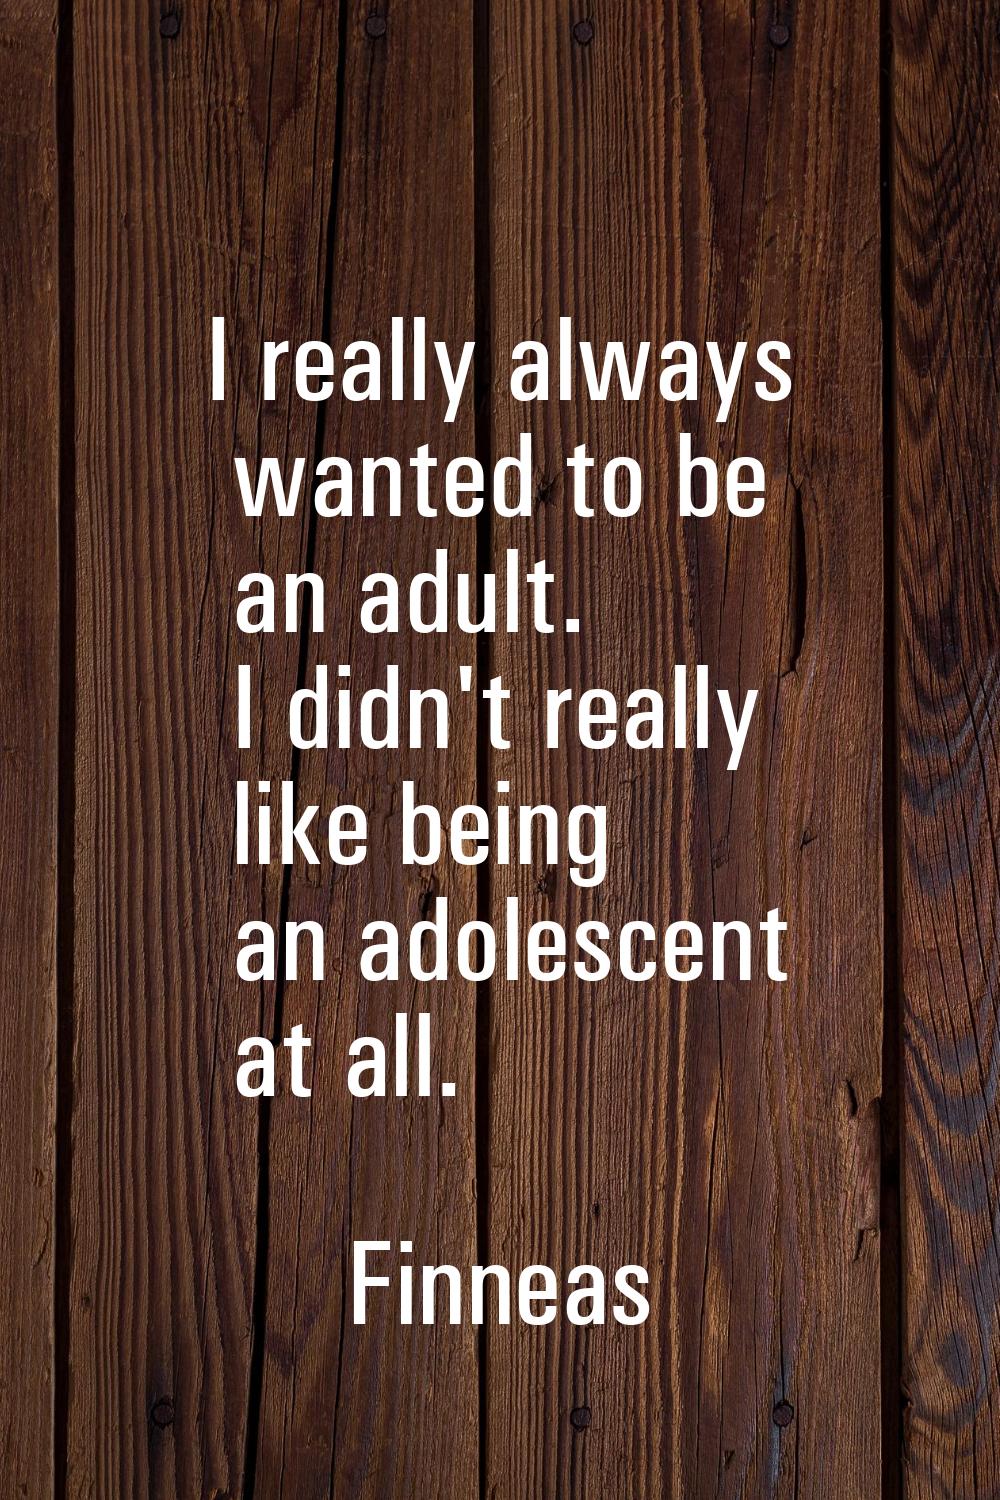 I really always wanted to be an adult. I didn't really like being an adolescent at all.